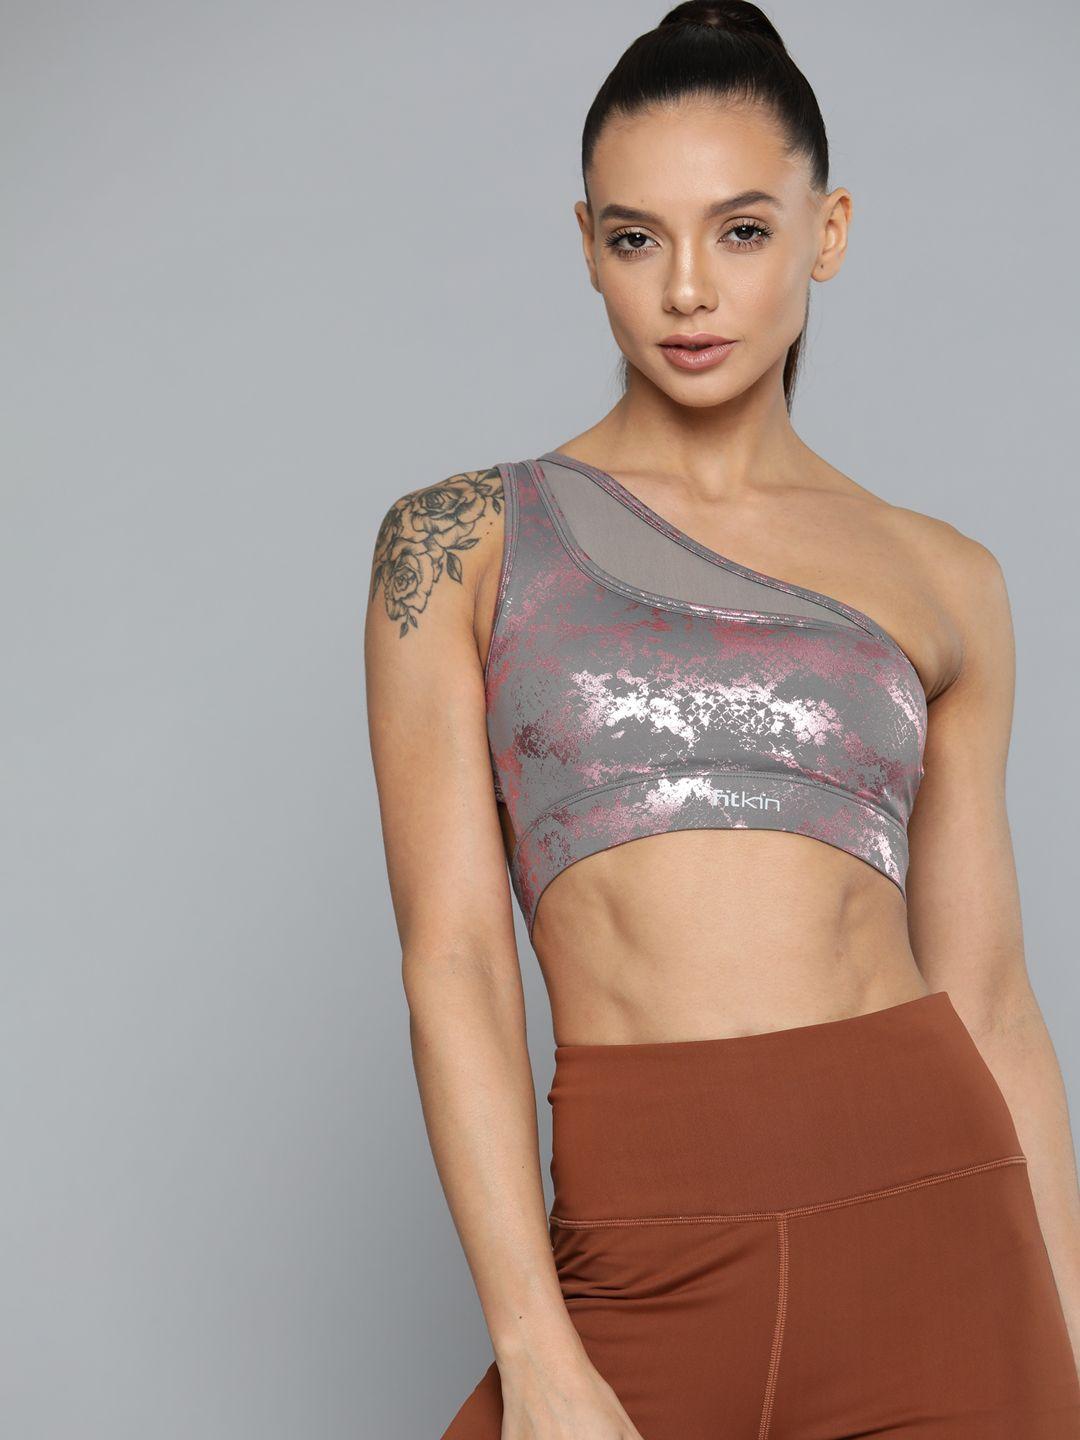 fitkin grey & pink abstract printed one shoulder sports bra b62-xs